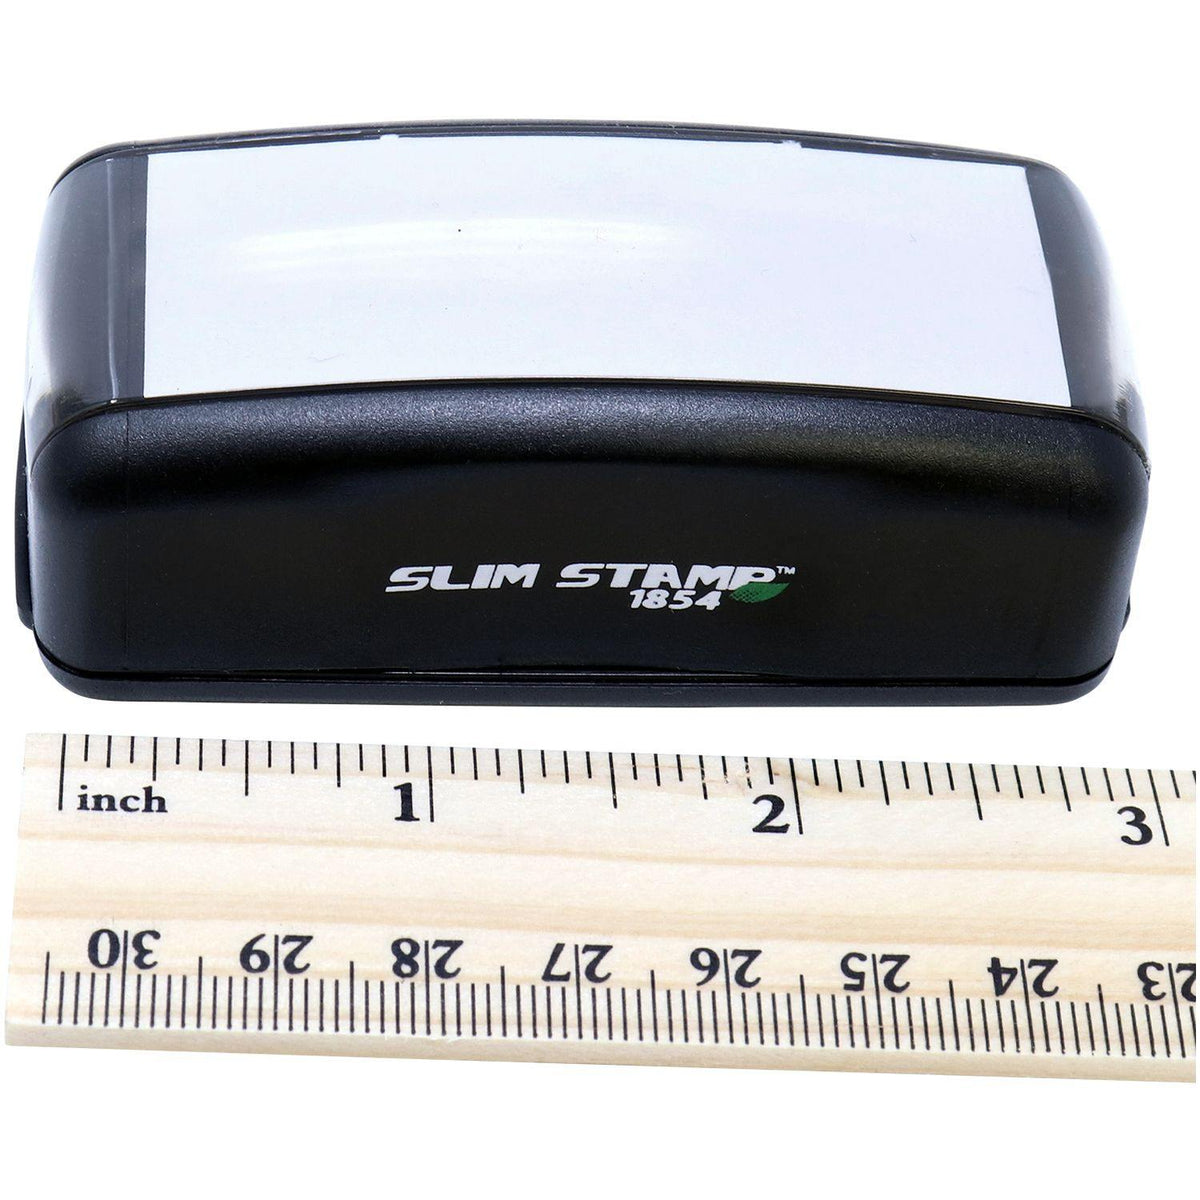 Measurement Large Pre Inked Shred Stamp with Ruler